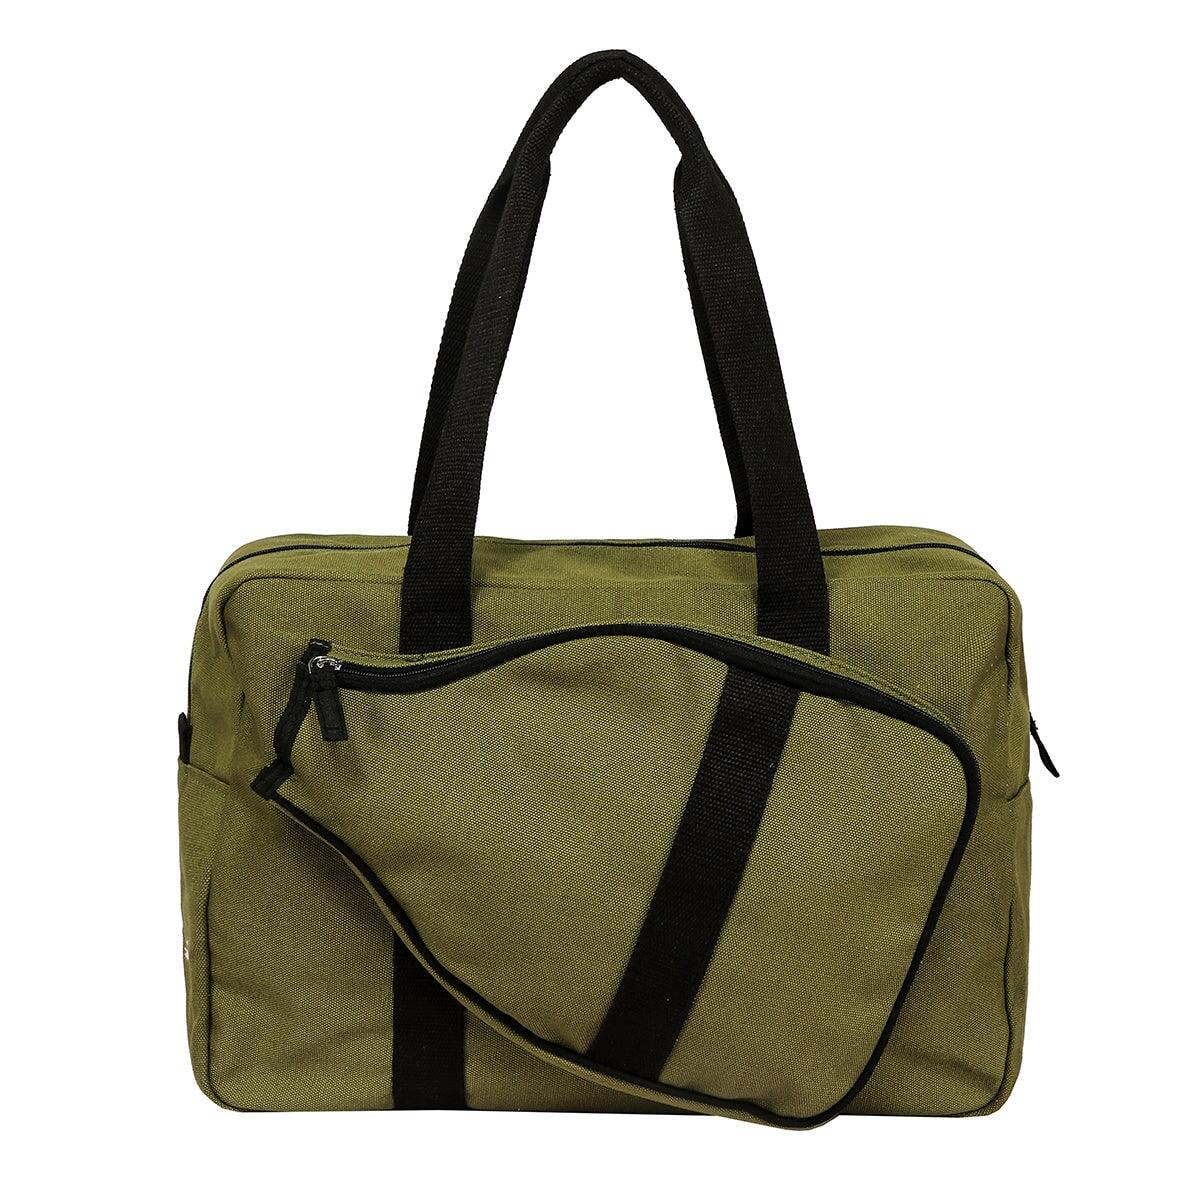 Madrid Pickle Ball Tote Tag&Crew Olive and Black Trim 